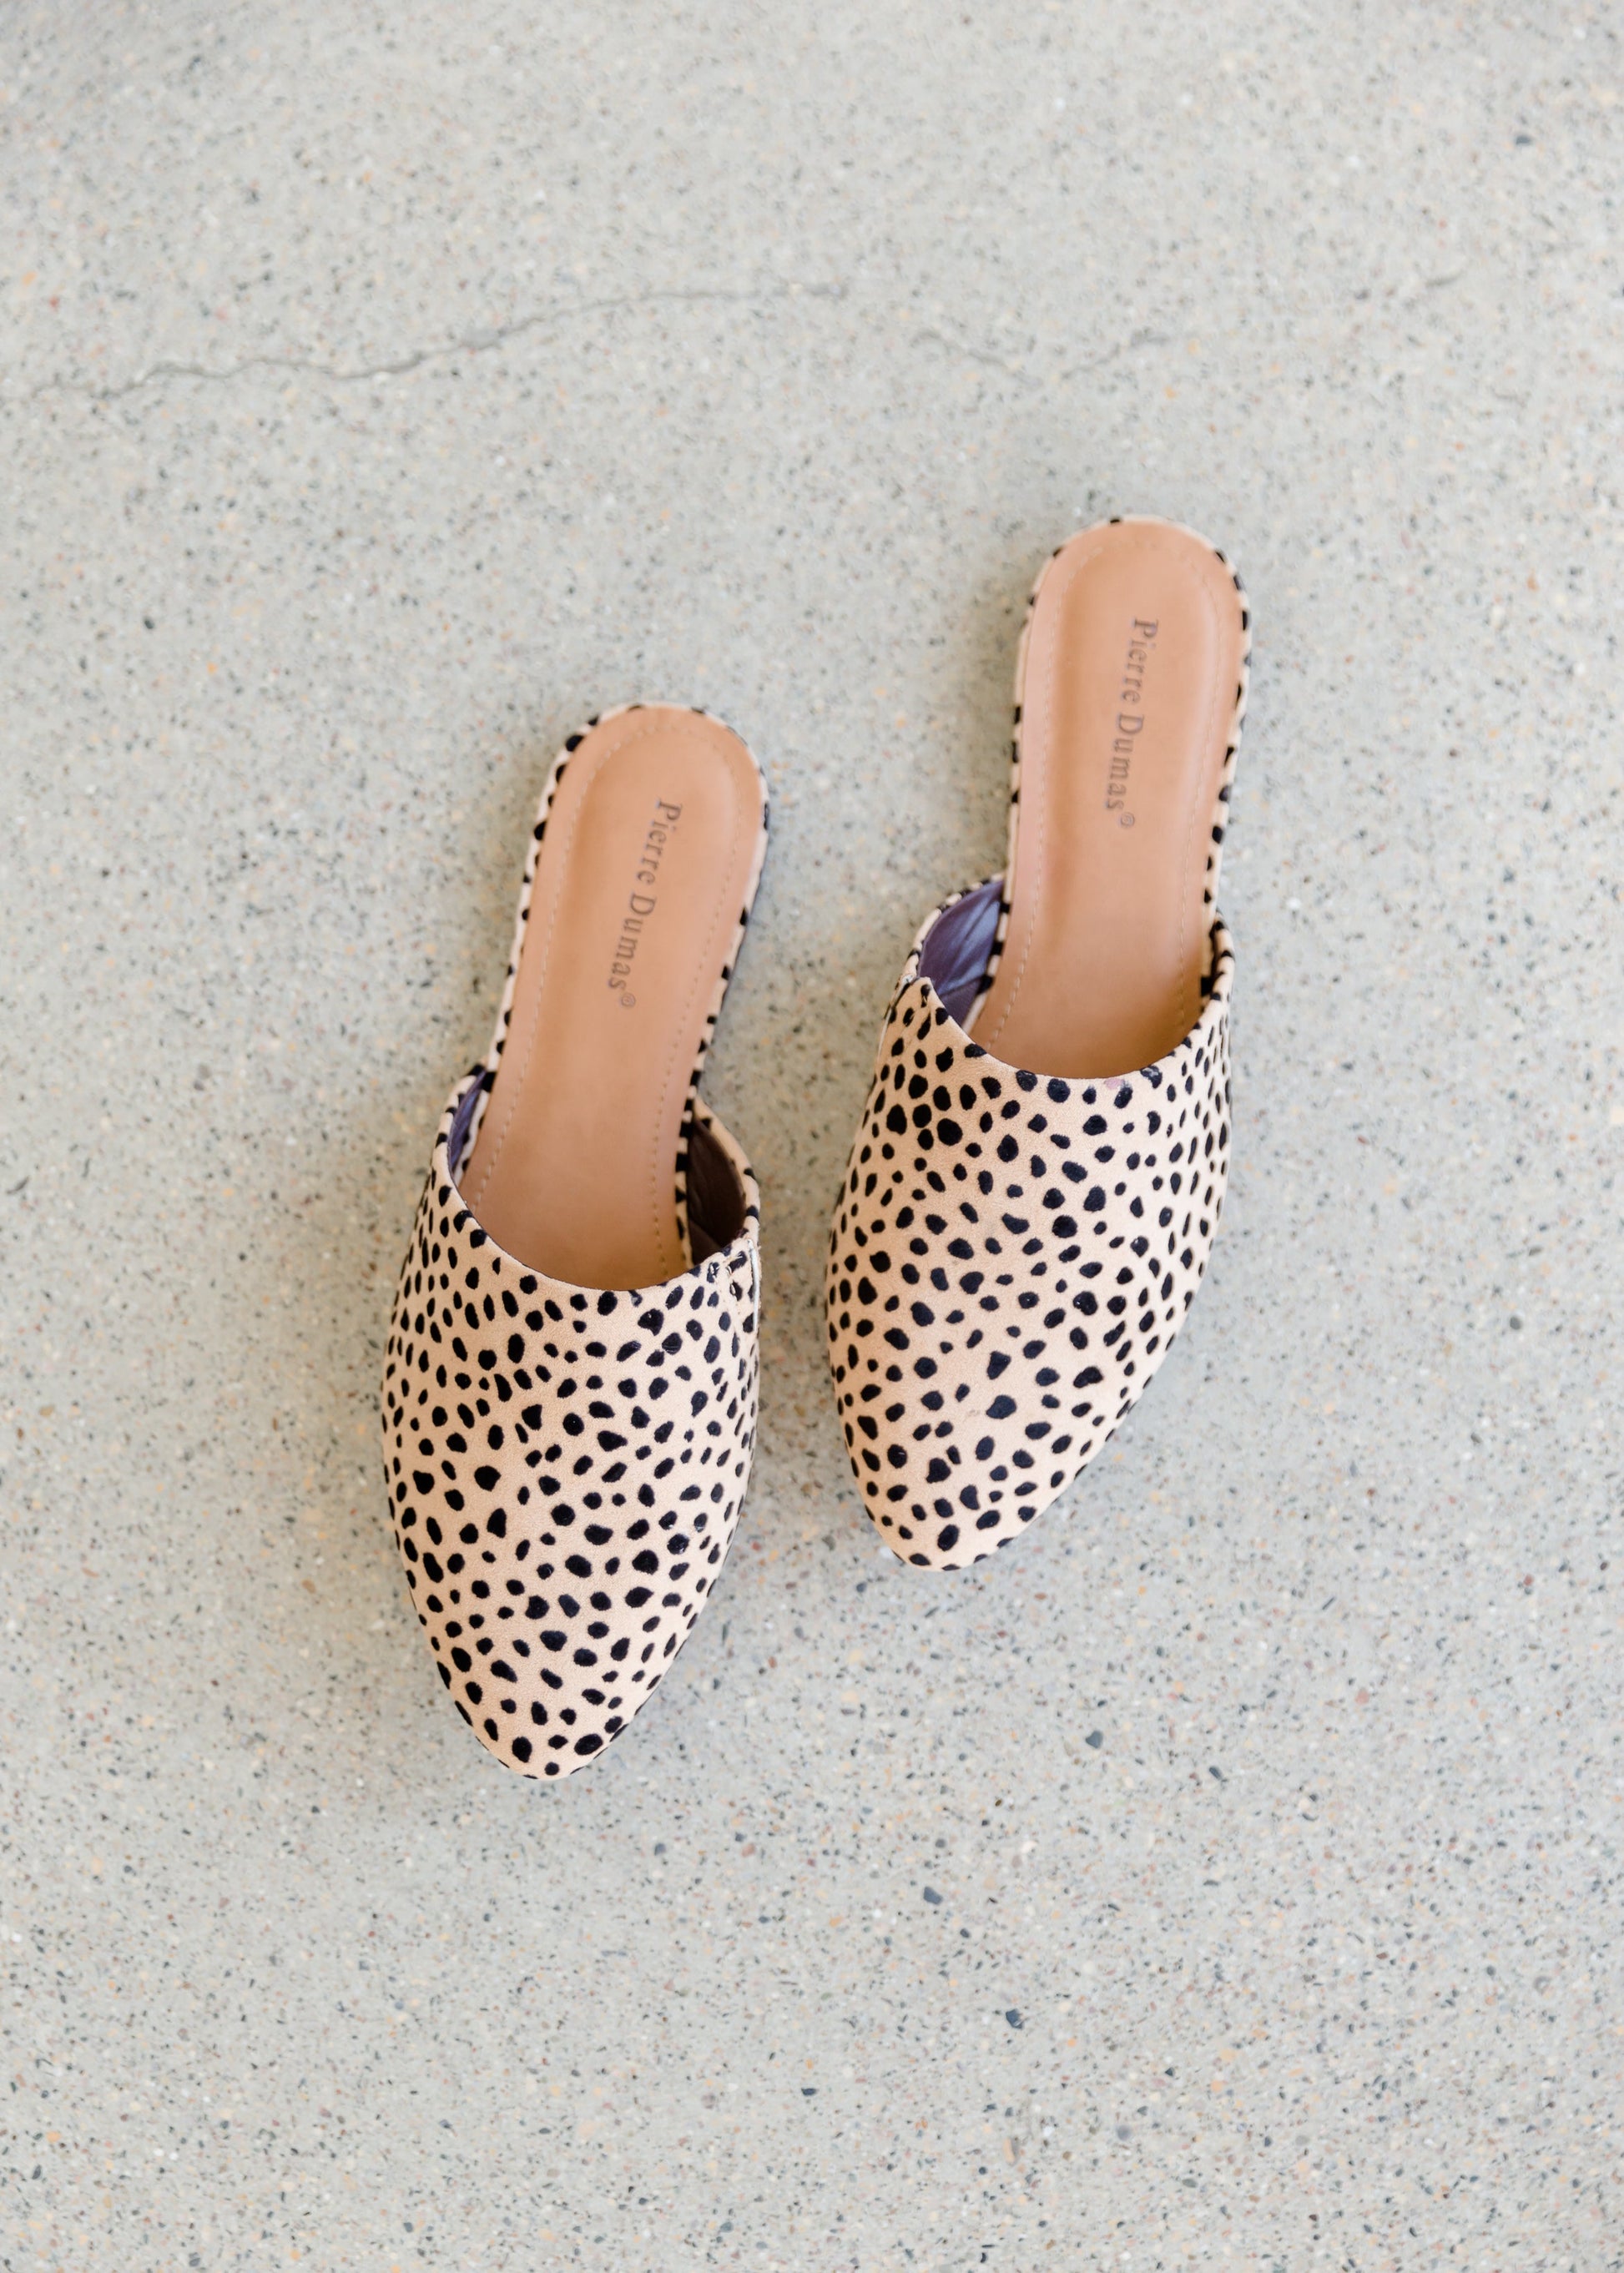 Pointed Toe Cheetah Mules - FINAL SALE Shoes